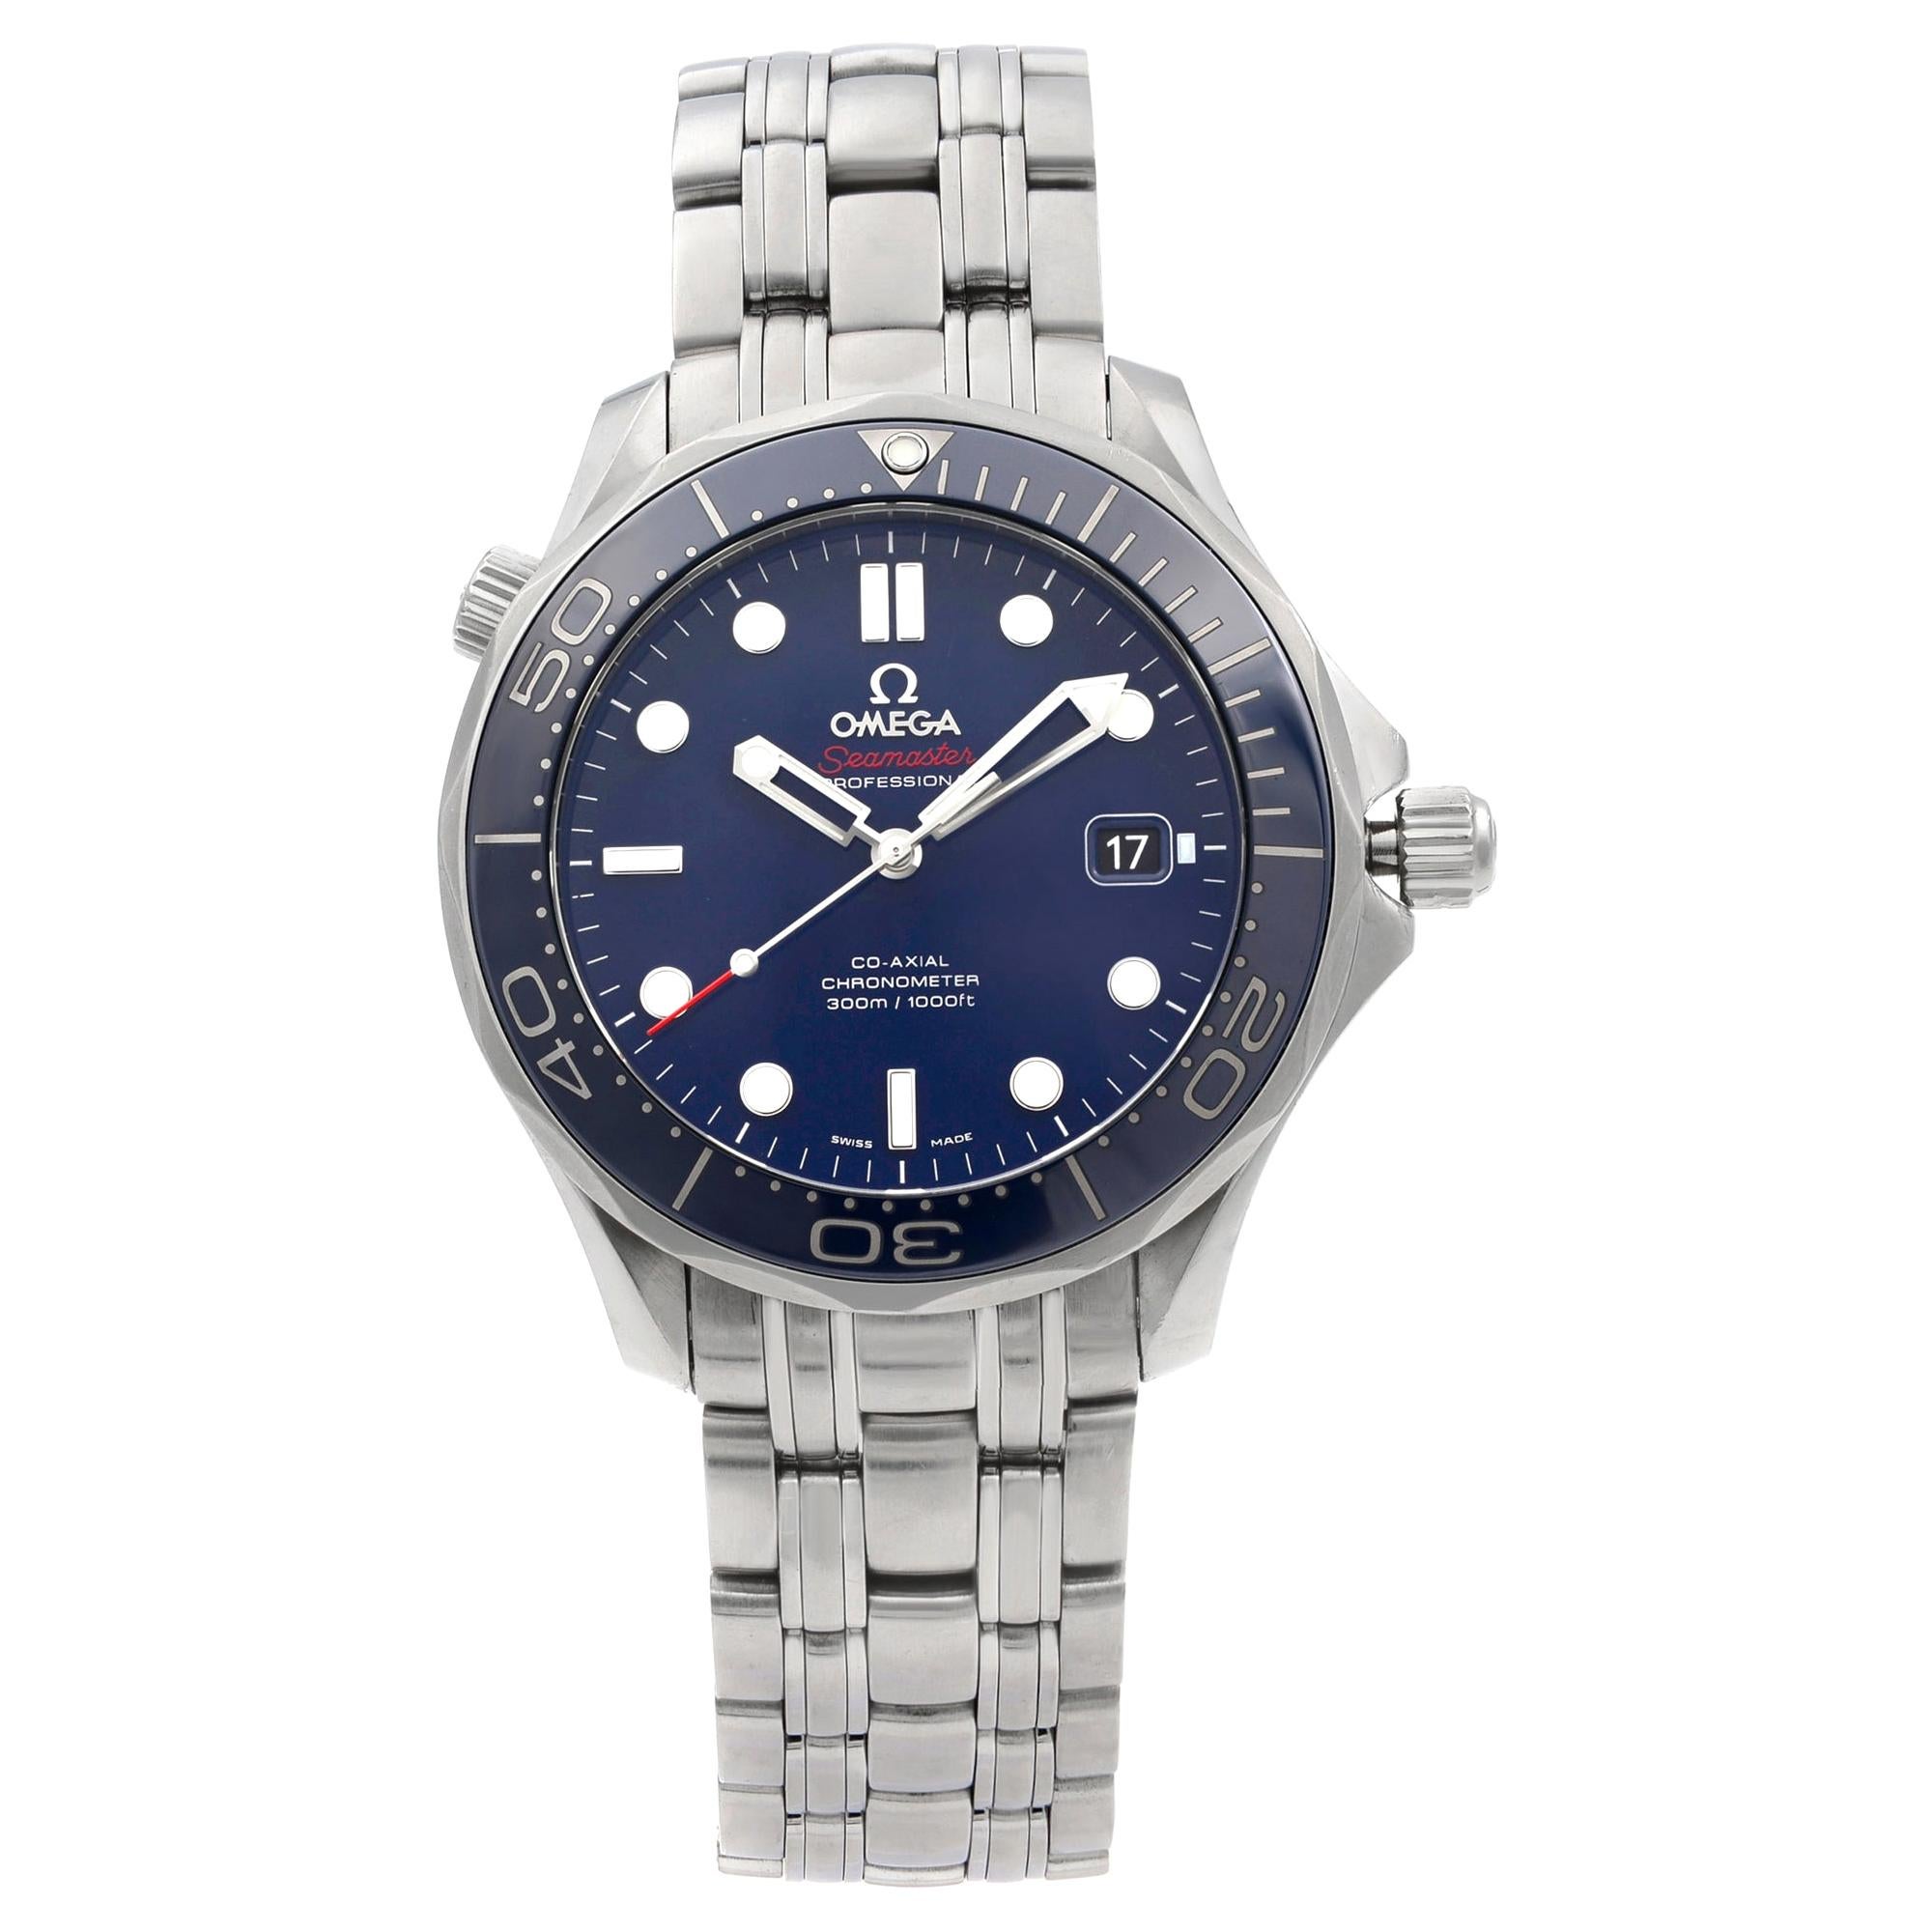 Omega Seamaster Diver Steel Blue Dial Automatic Men's Watch 212.30.41.20.03.001